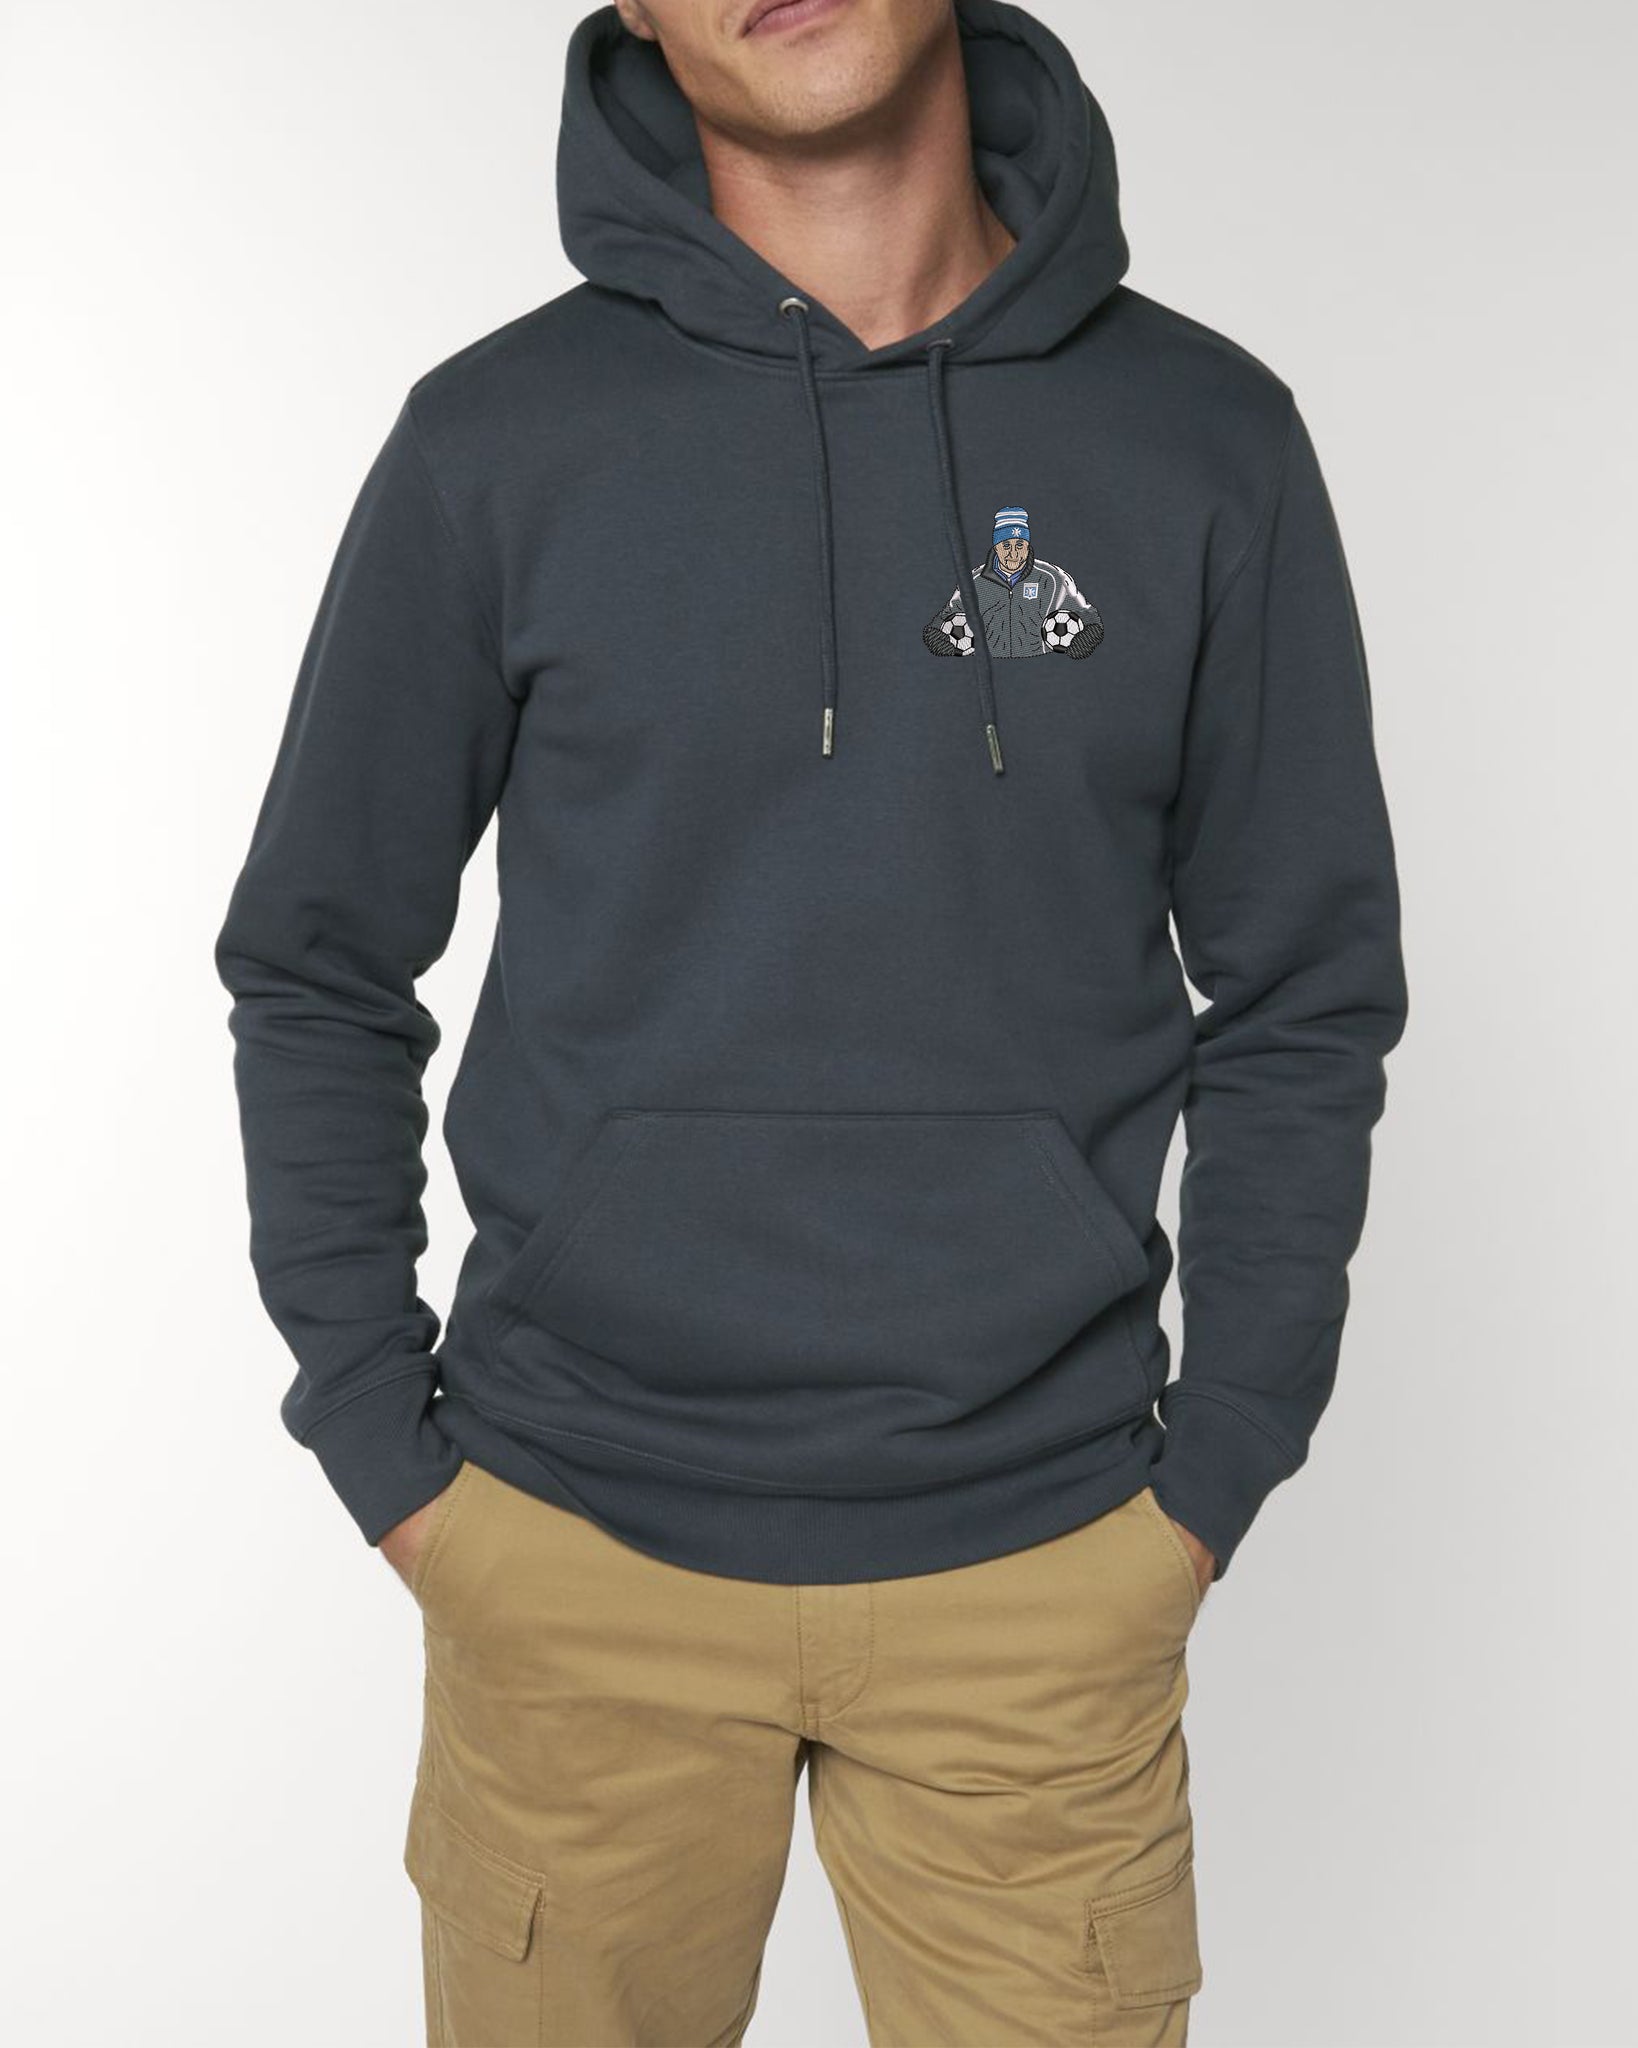 Guy Roux Embroidered Hoodie